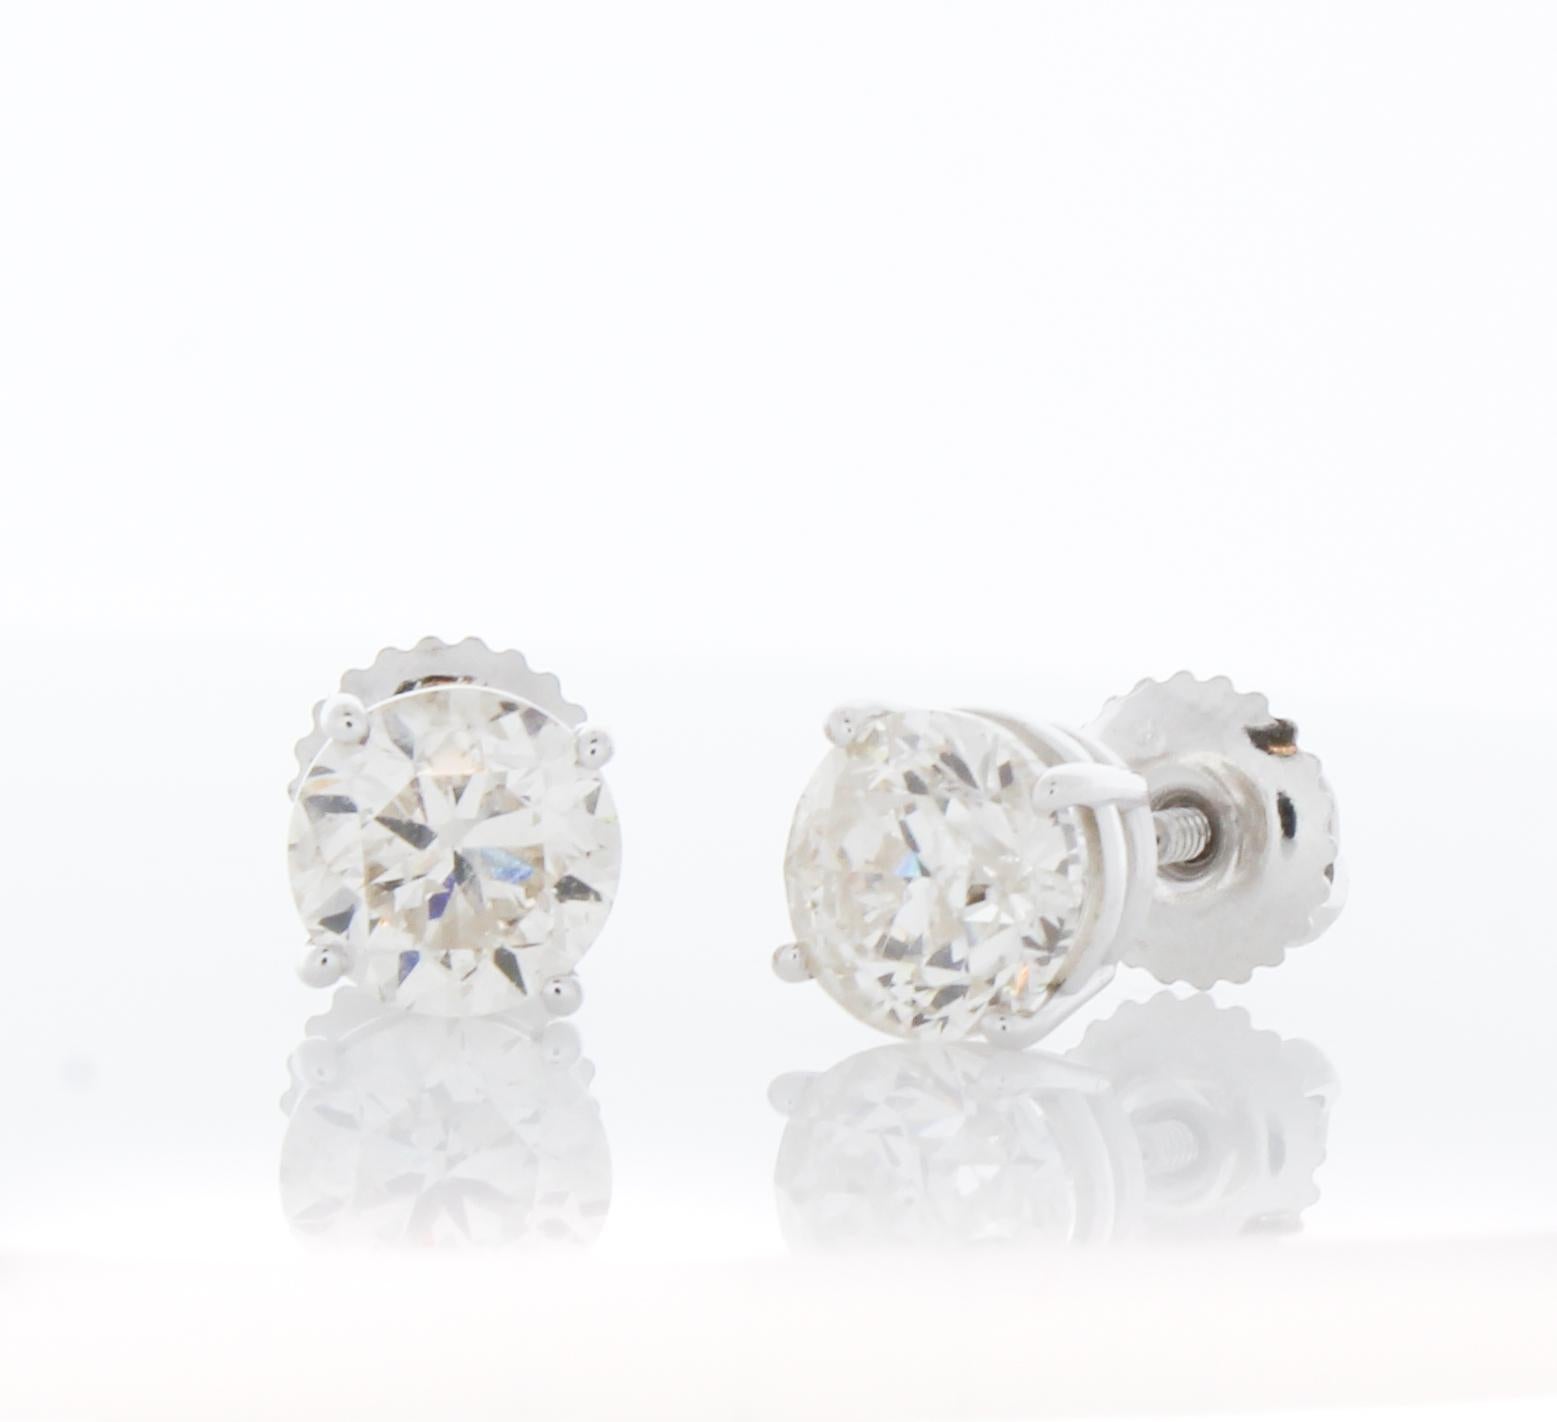 Round Cut 2.00 Carat Total Weight Diamond Stud Earrings in 14k White Gold For Sale